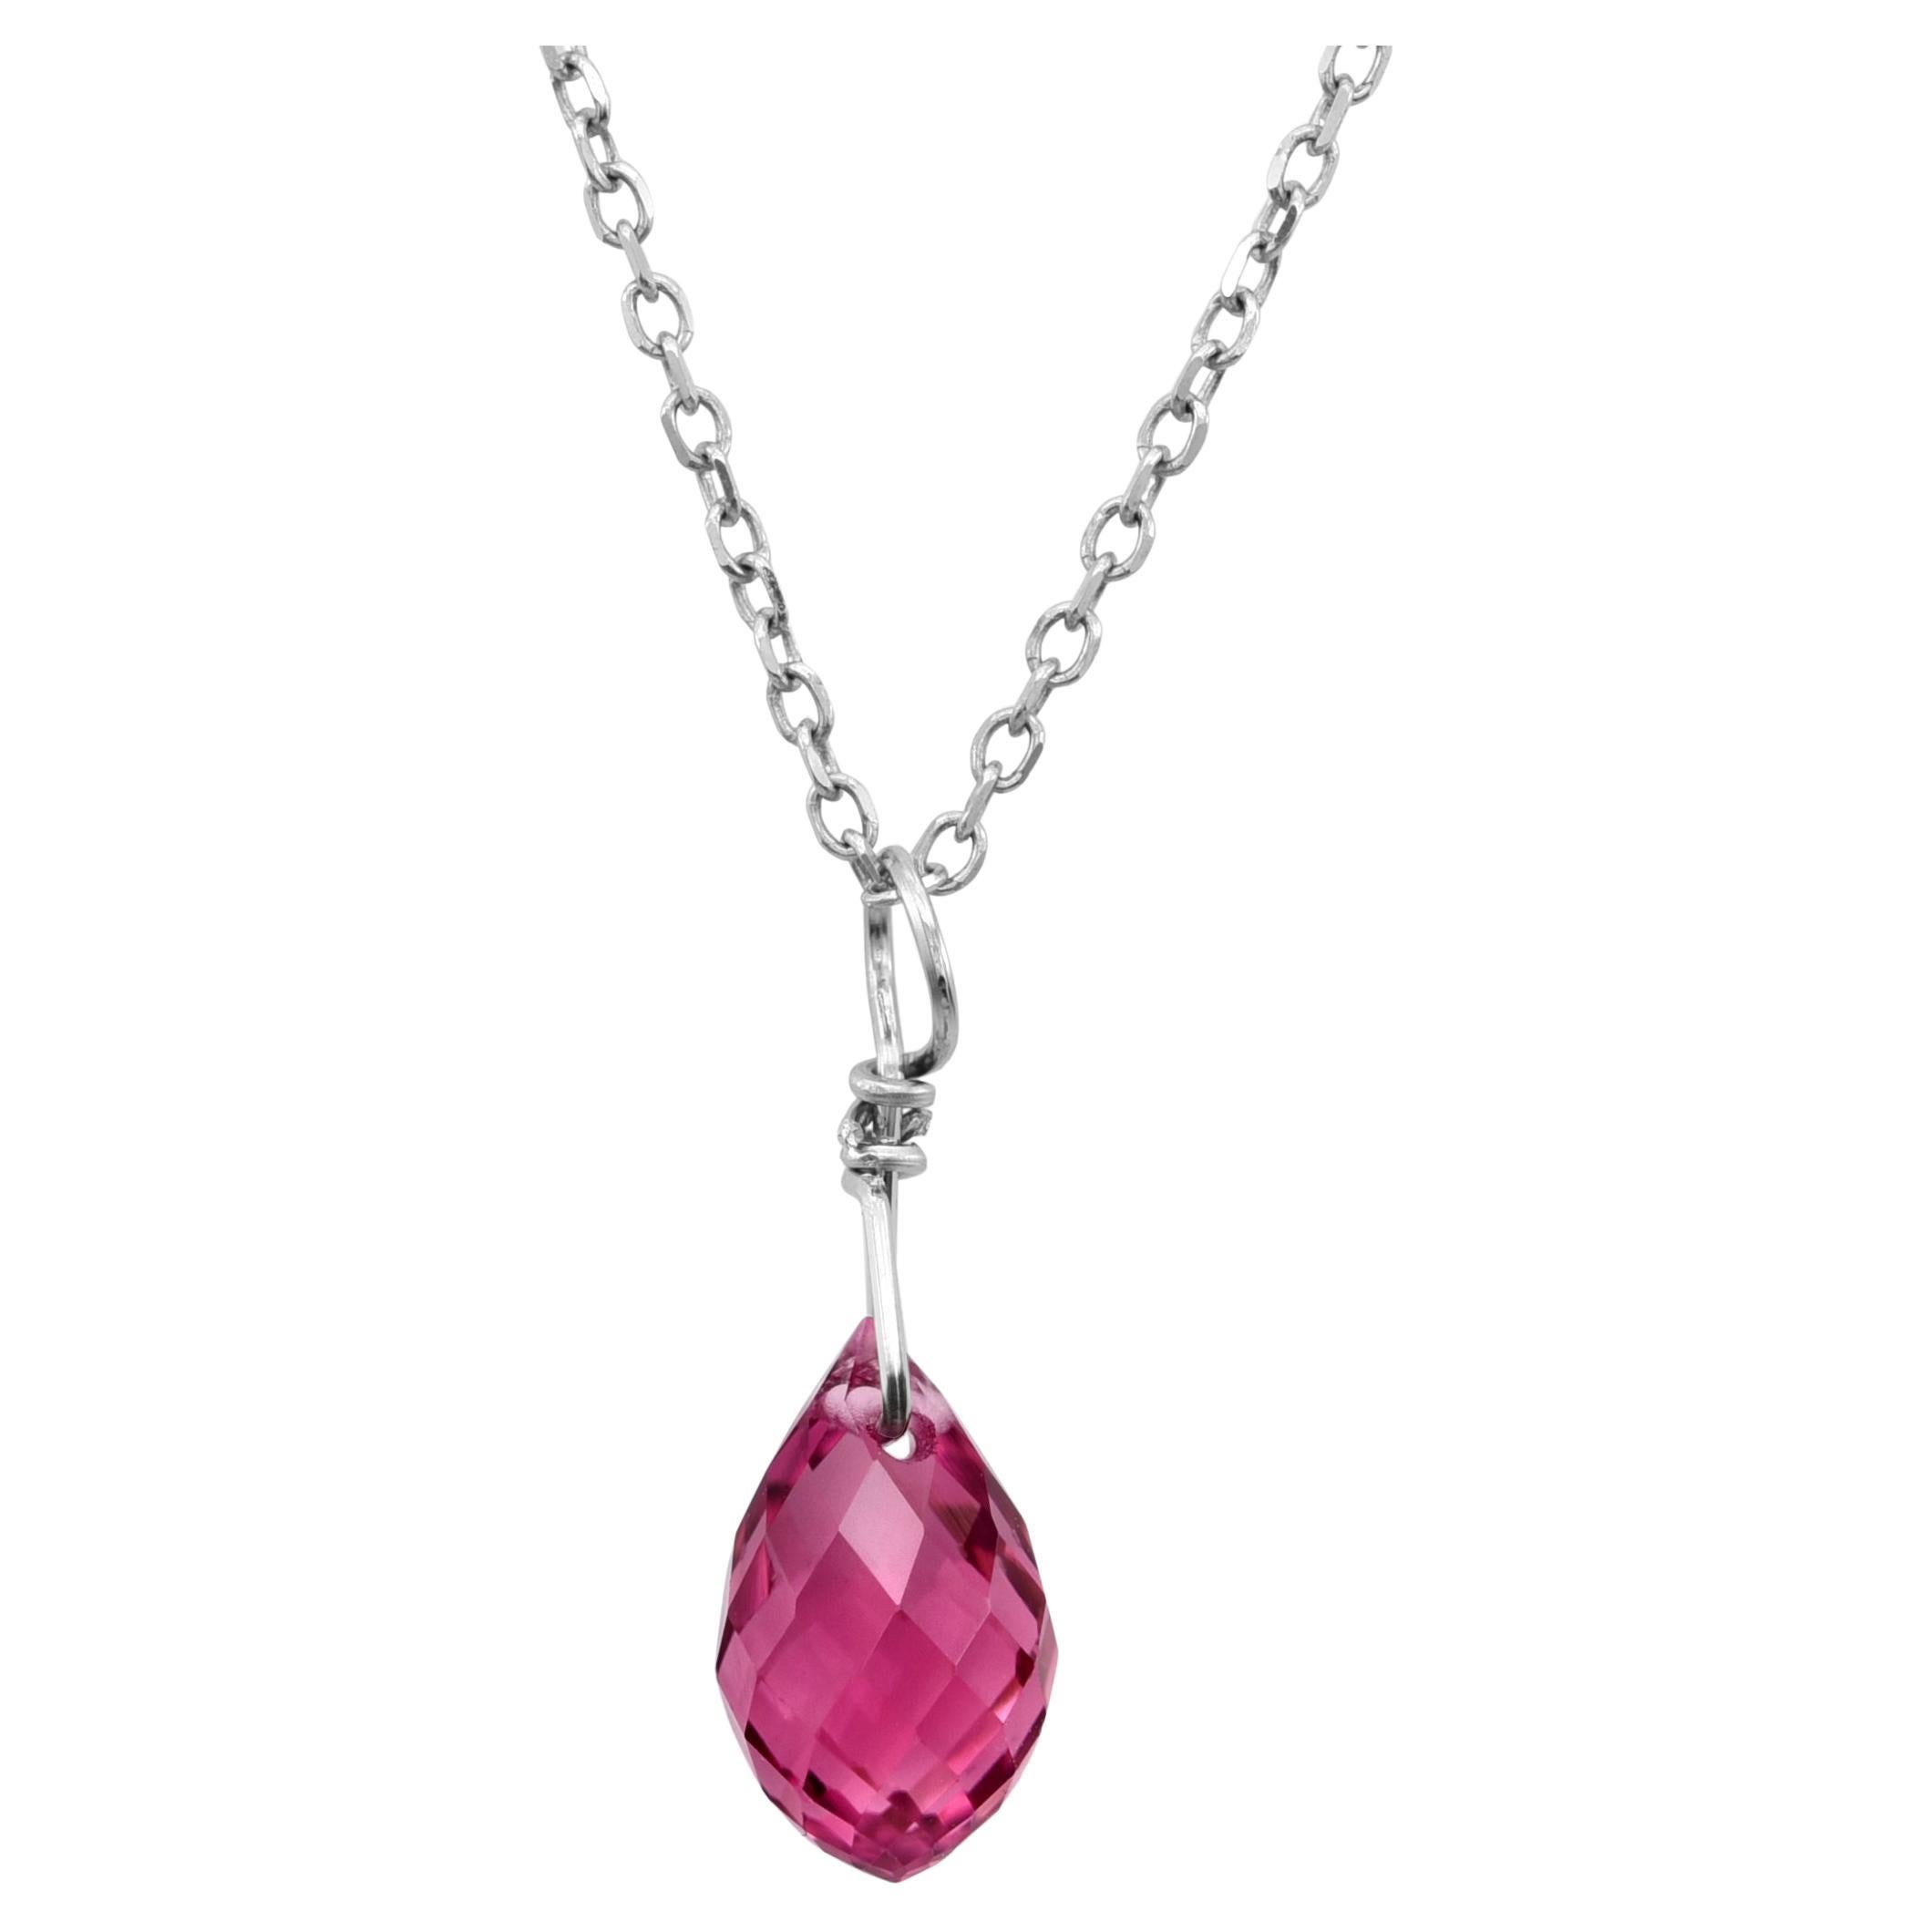 1.38 Ct Pink Tourmaline Necklace 14K White Gold, 18" Spring Chain, Pink Jewelry For Sale